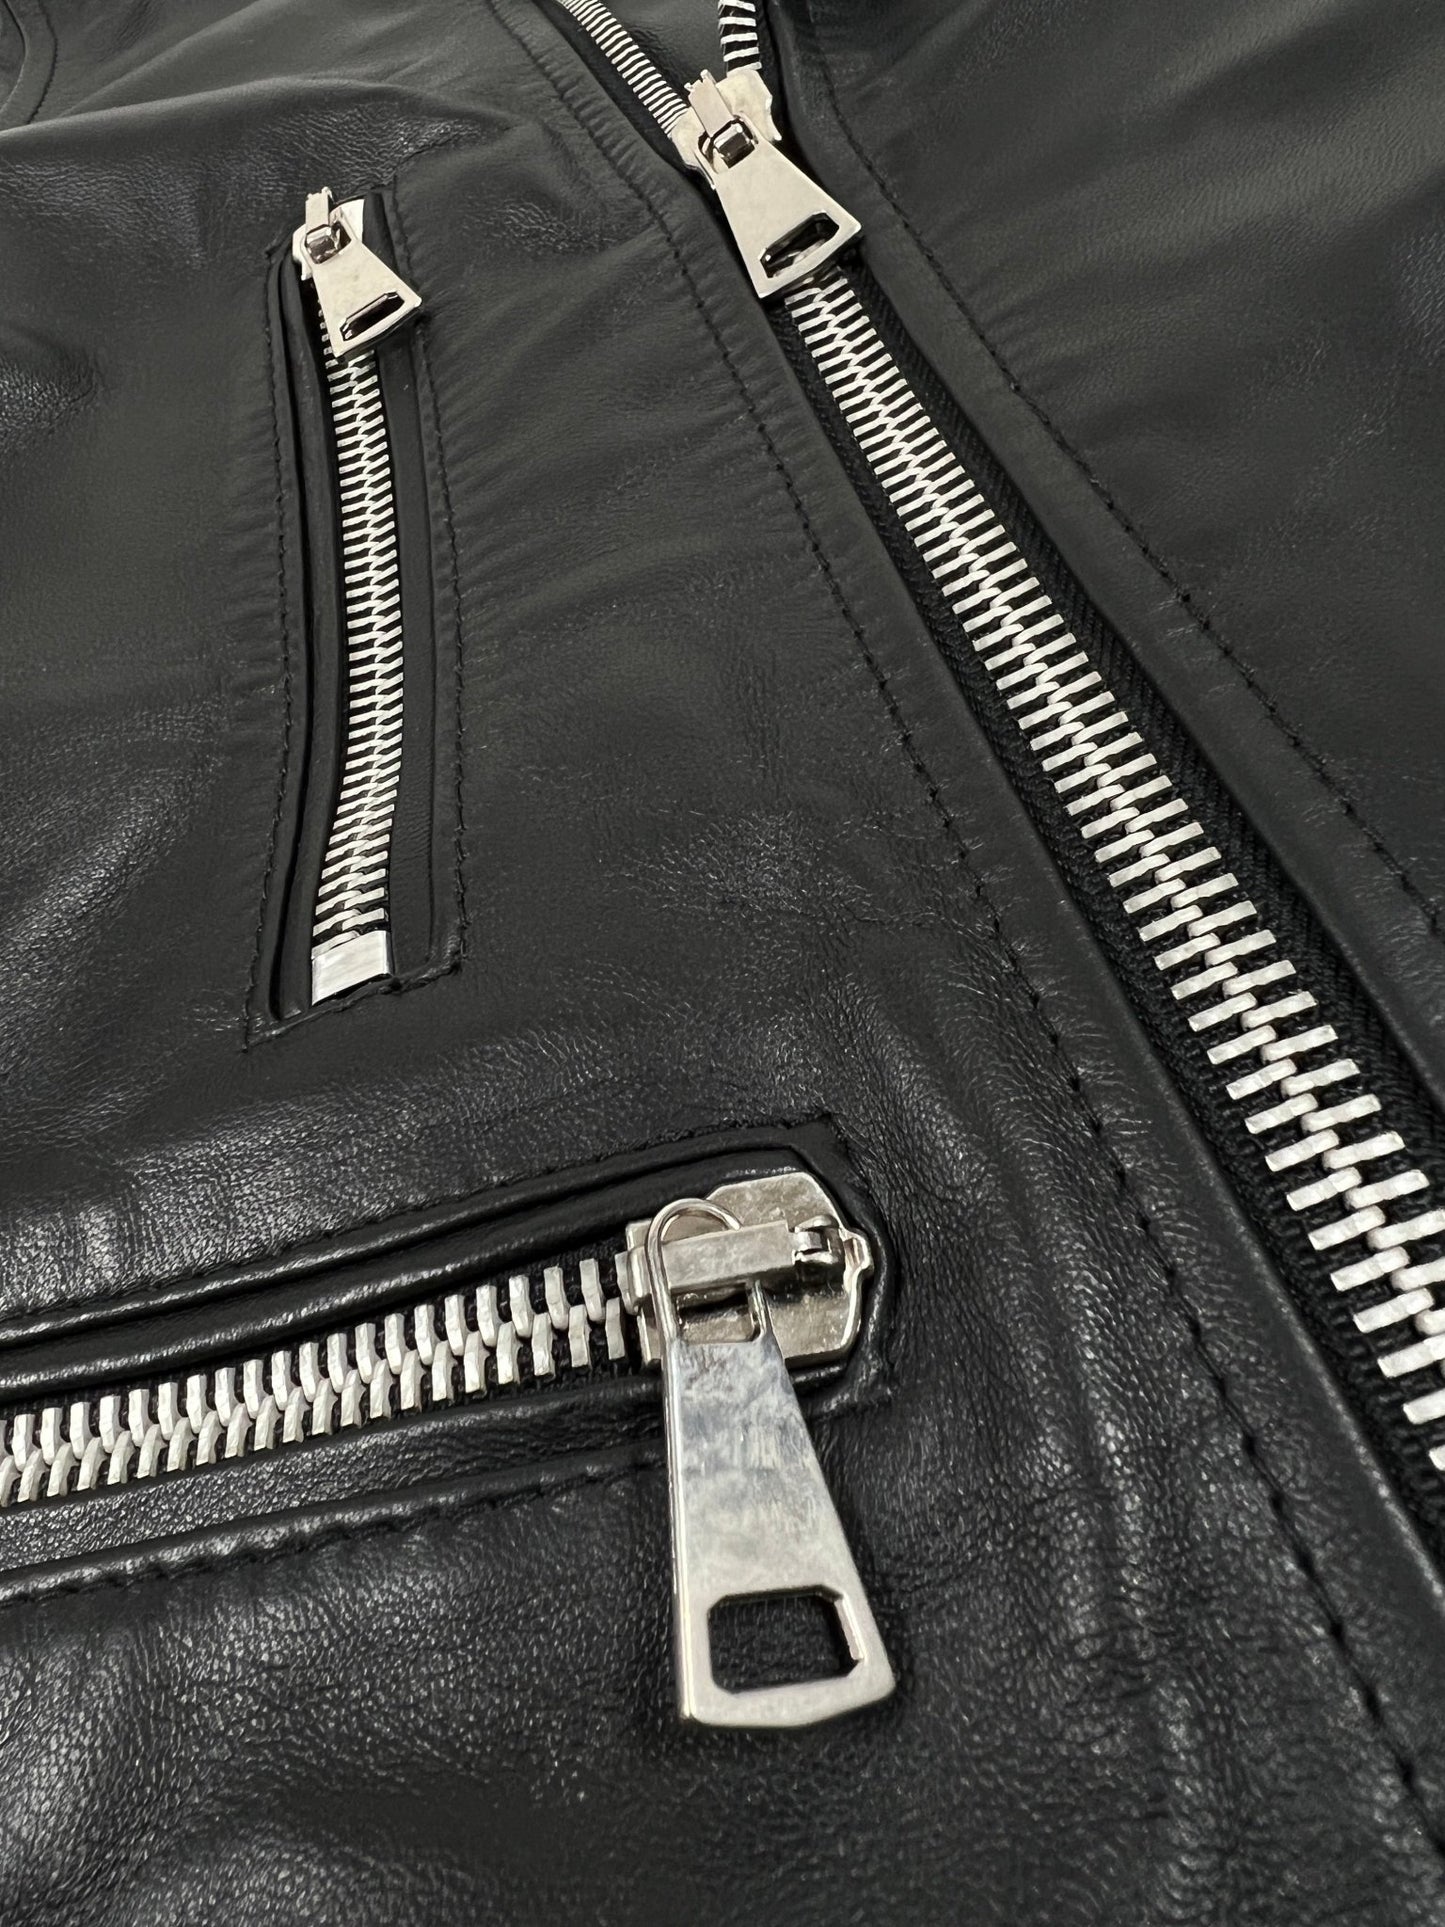 A close up of a FAMILY FIRST JLS2304BK BIKER VEGAN LEATHER JACKET BLACK with zippers.